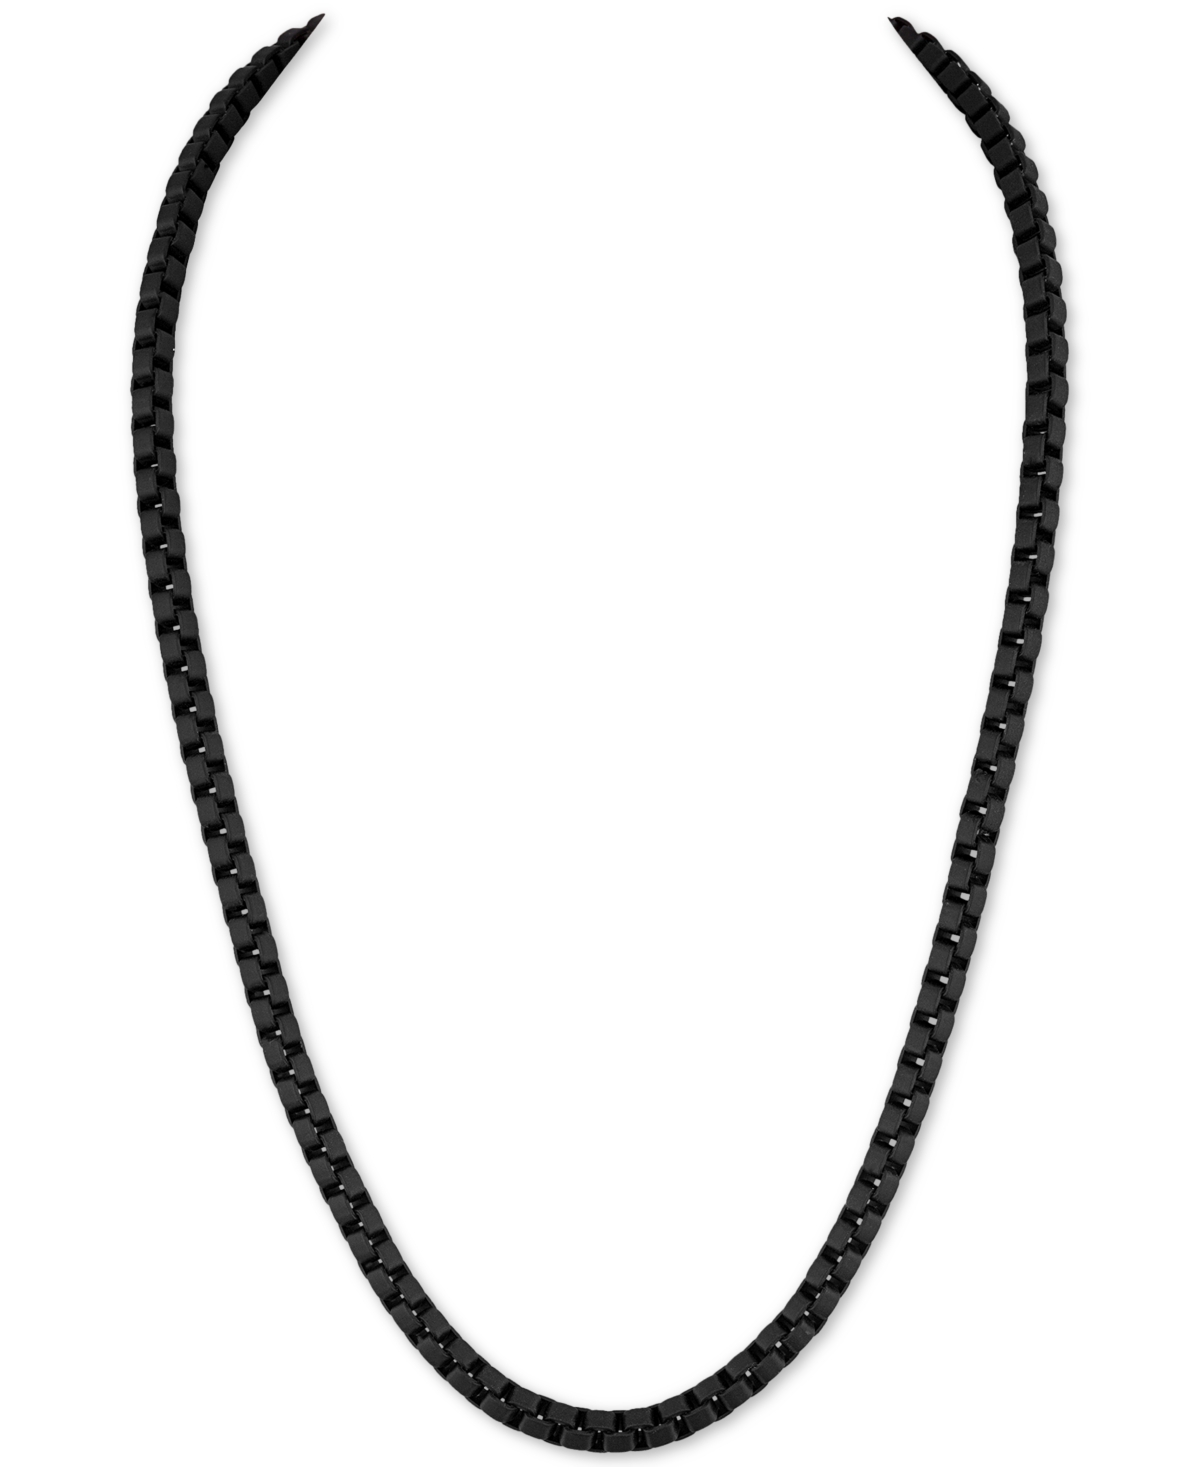 Men's Box Link 22" Chain Necklace in Black Enamel over Stainless Steel (Also in Red & Blue Enamel), Created for Macy's - Black